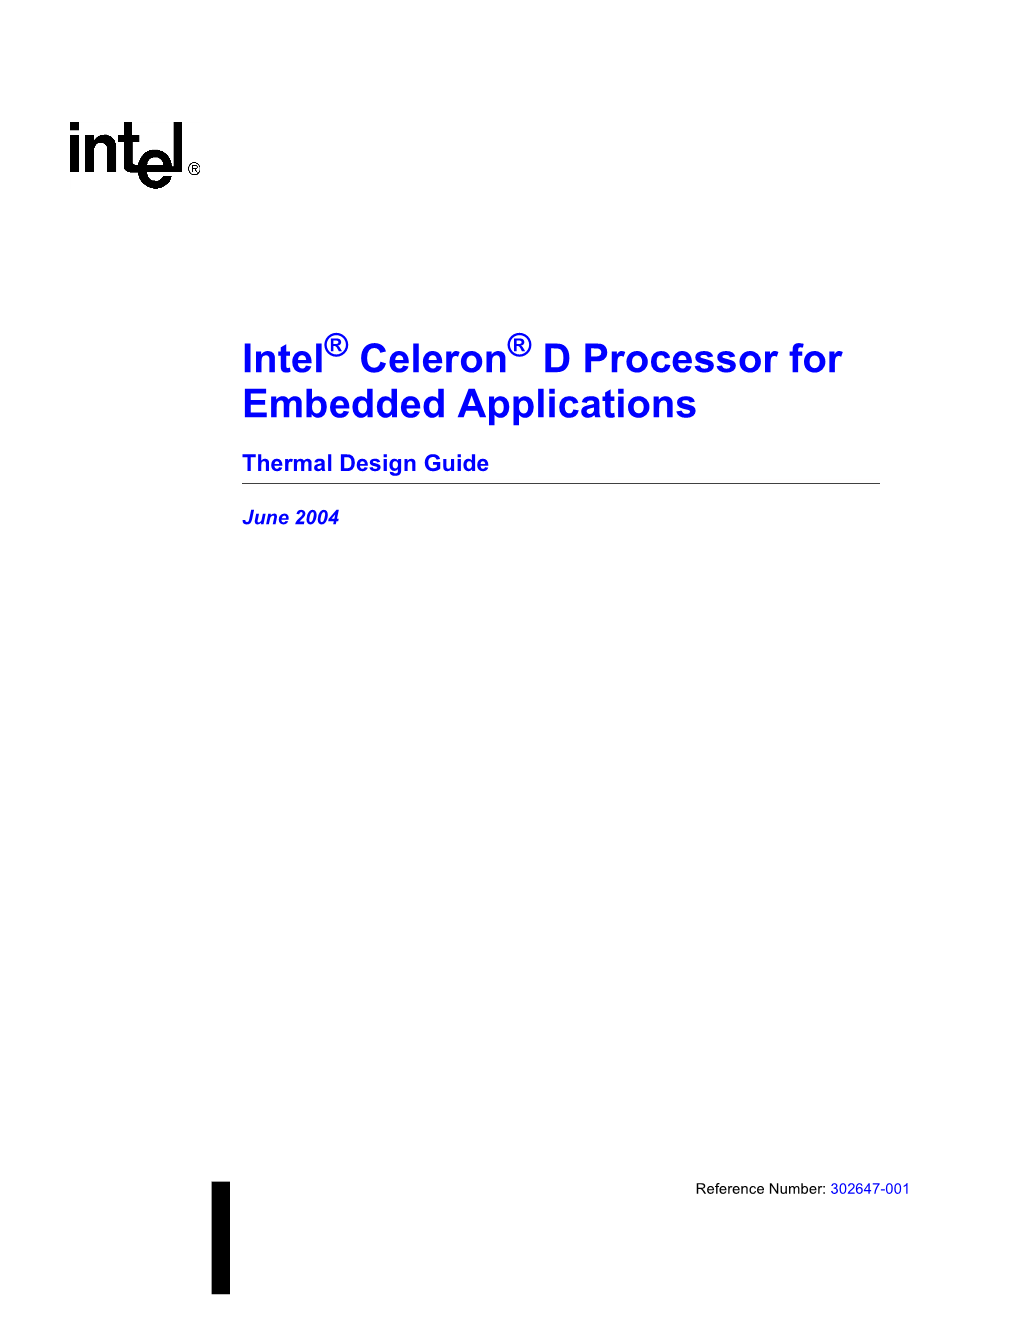 Intel® Celeron® D Processor for Embedded Applications Thermal Design Guide Contents